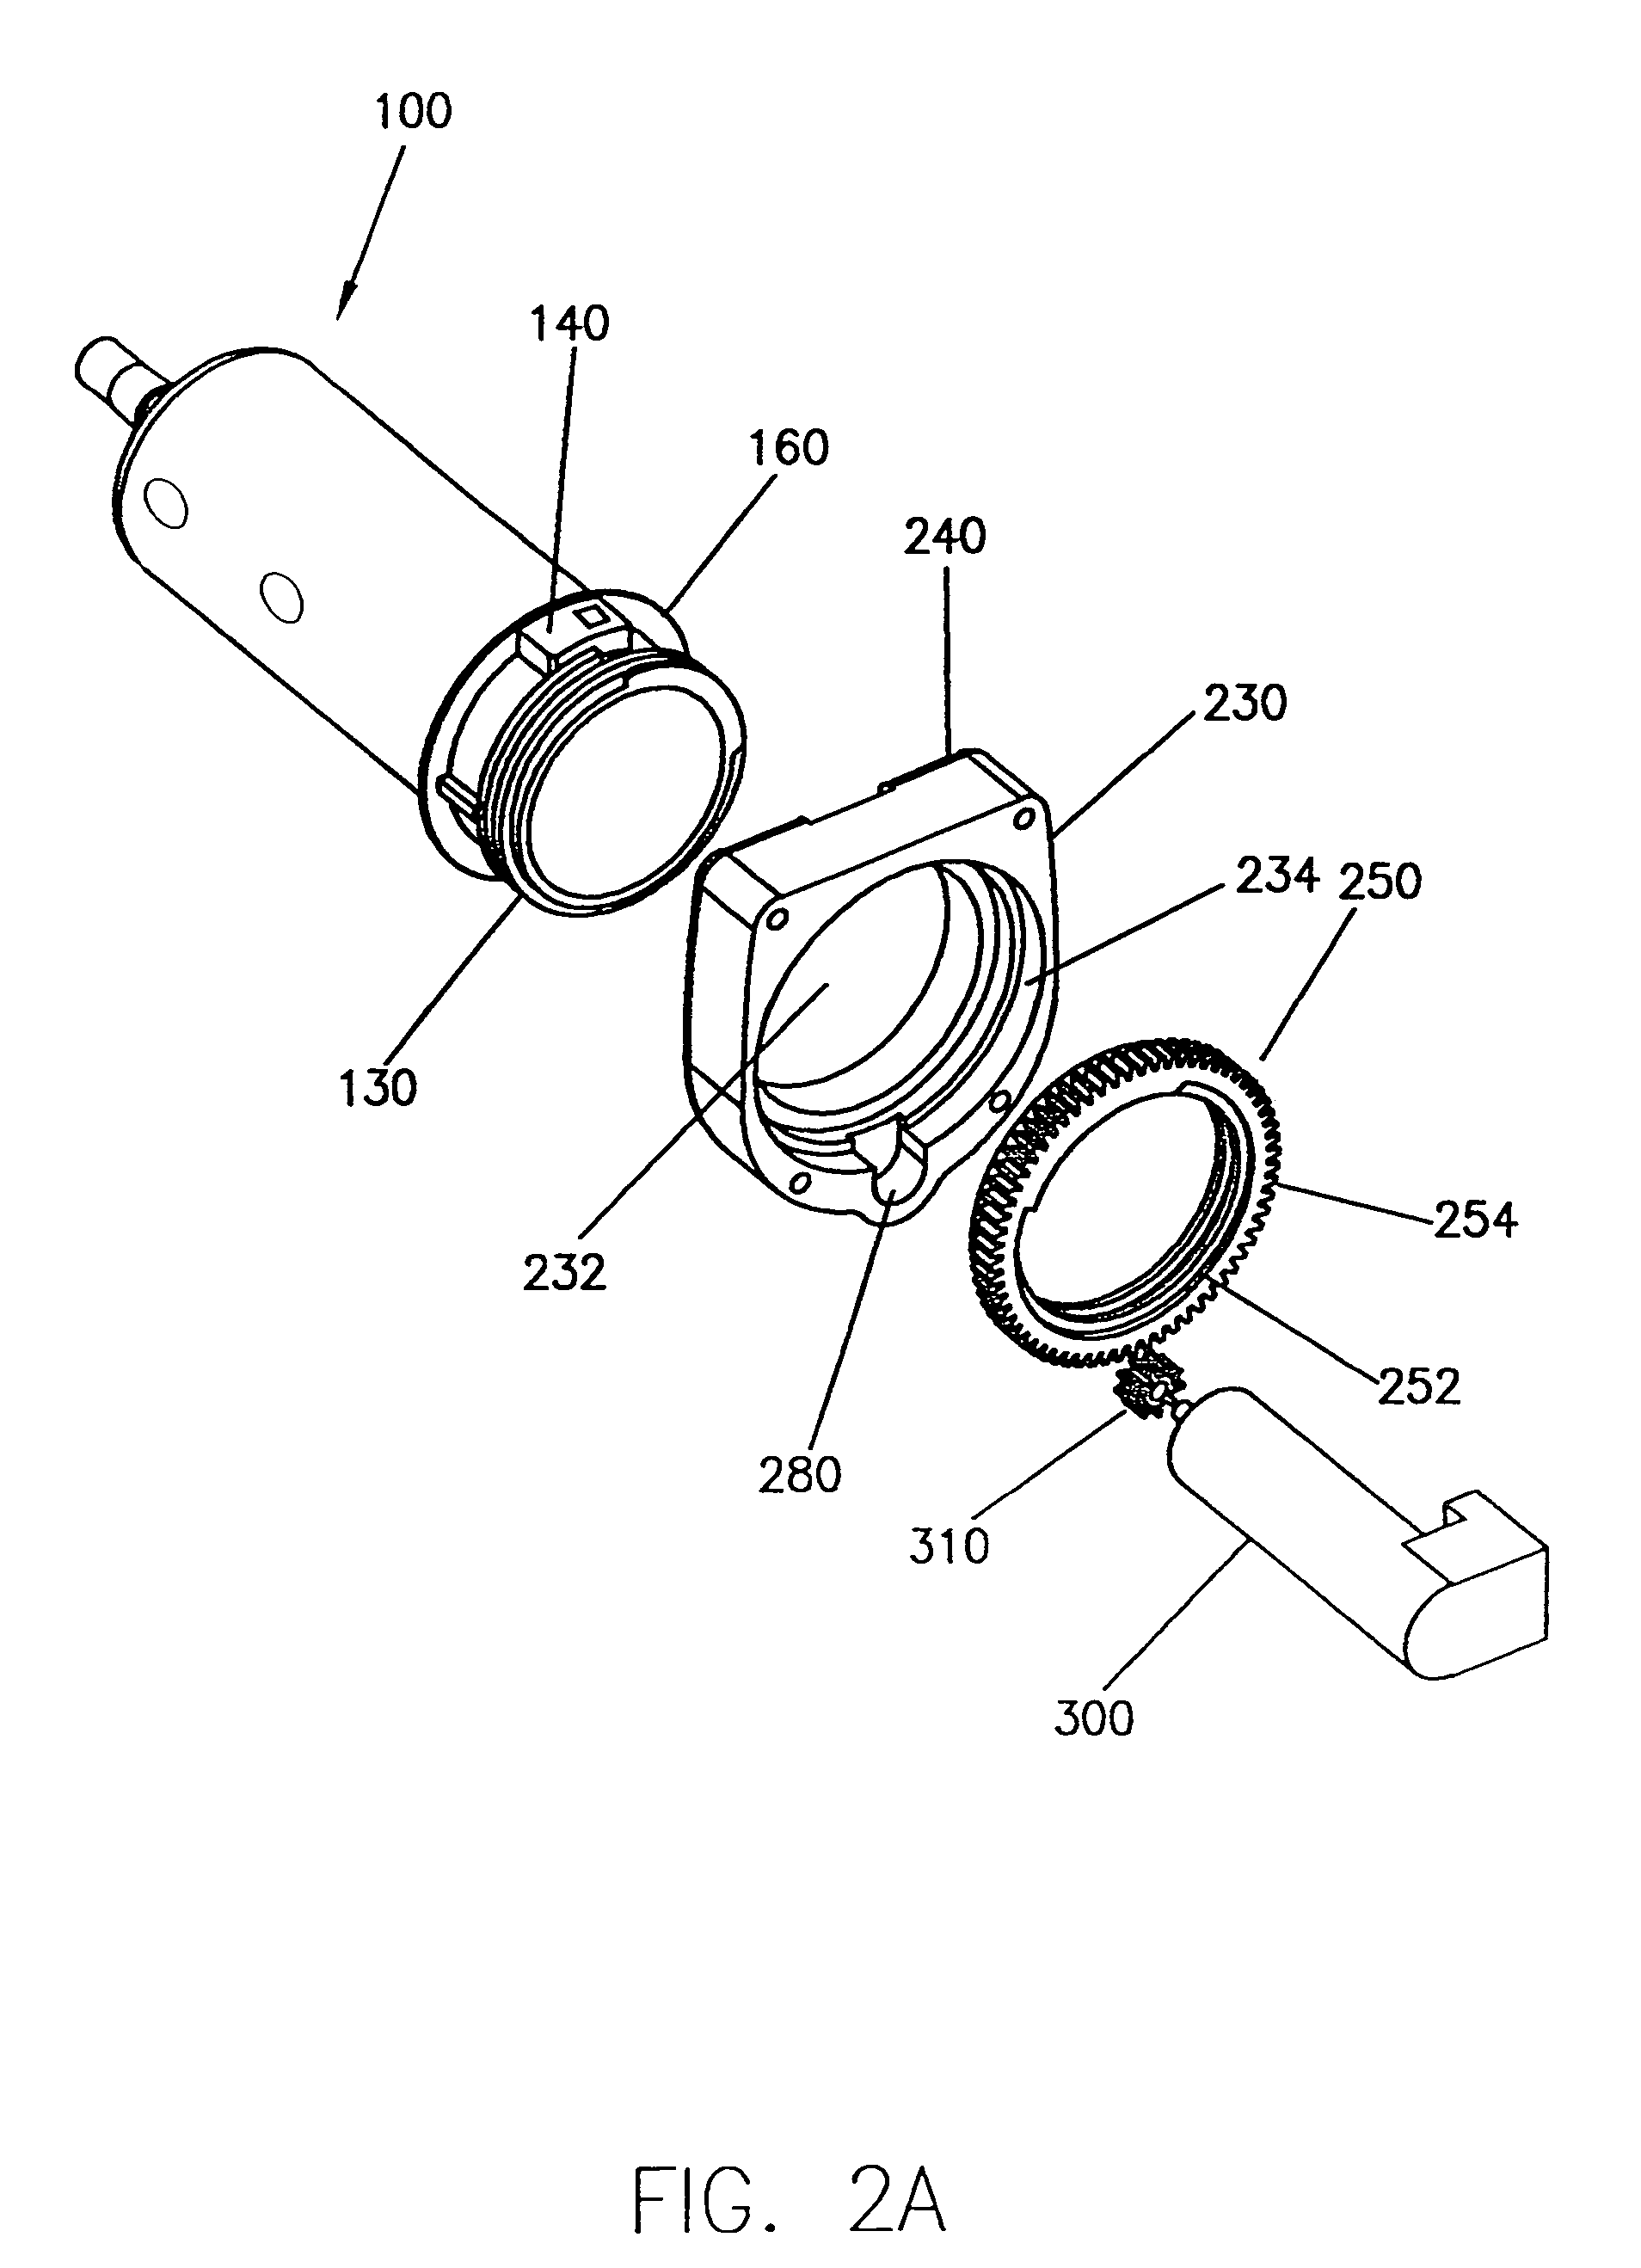 Injector providing drive member advancement and engagement with syringe plunger, and method of connecting a syringe to an injector